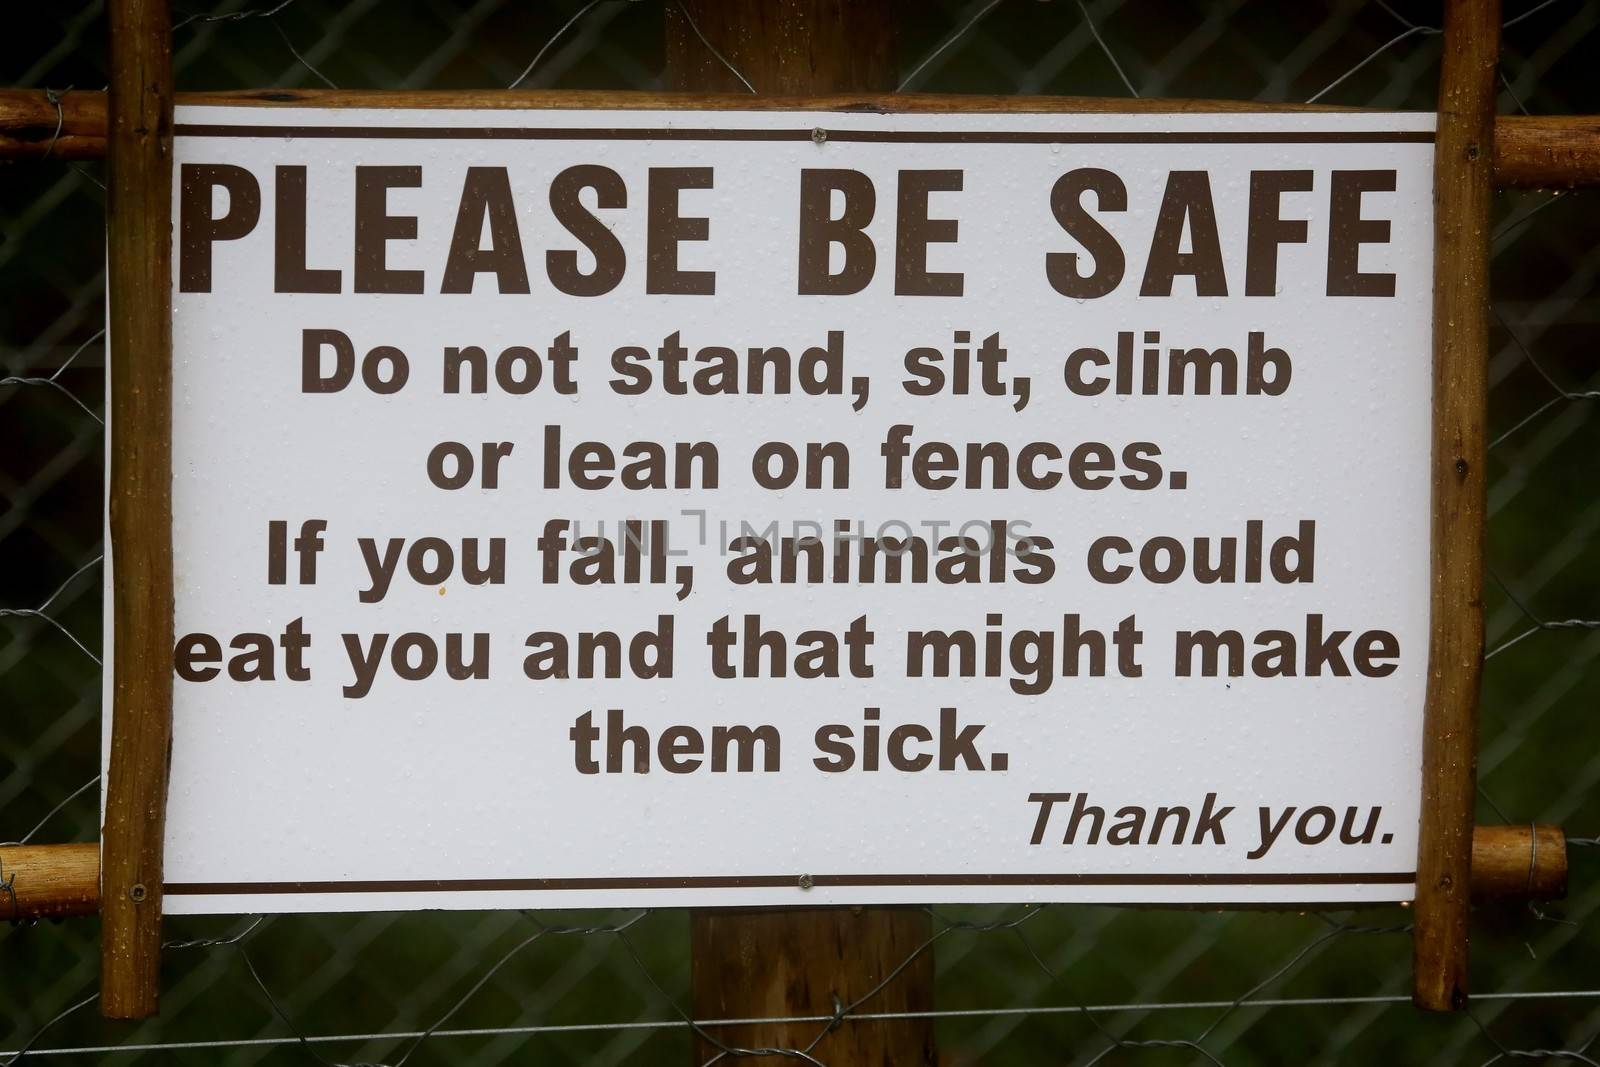 Funny Sign warning about dangerous animals